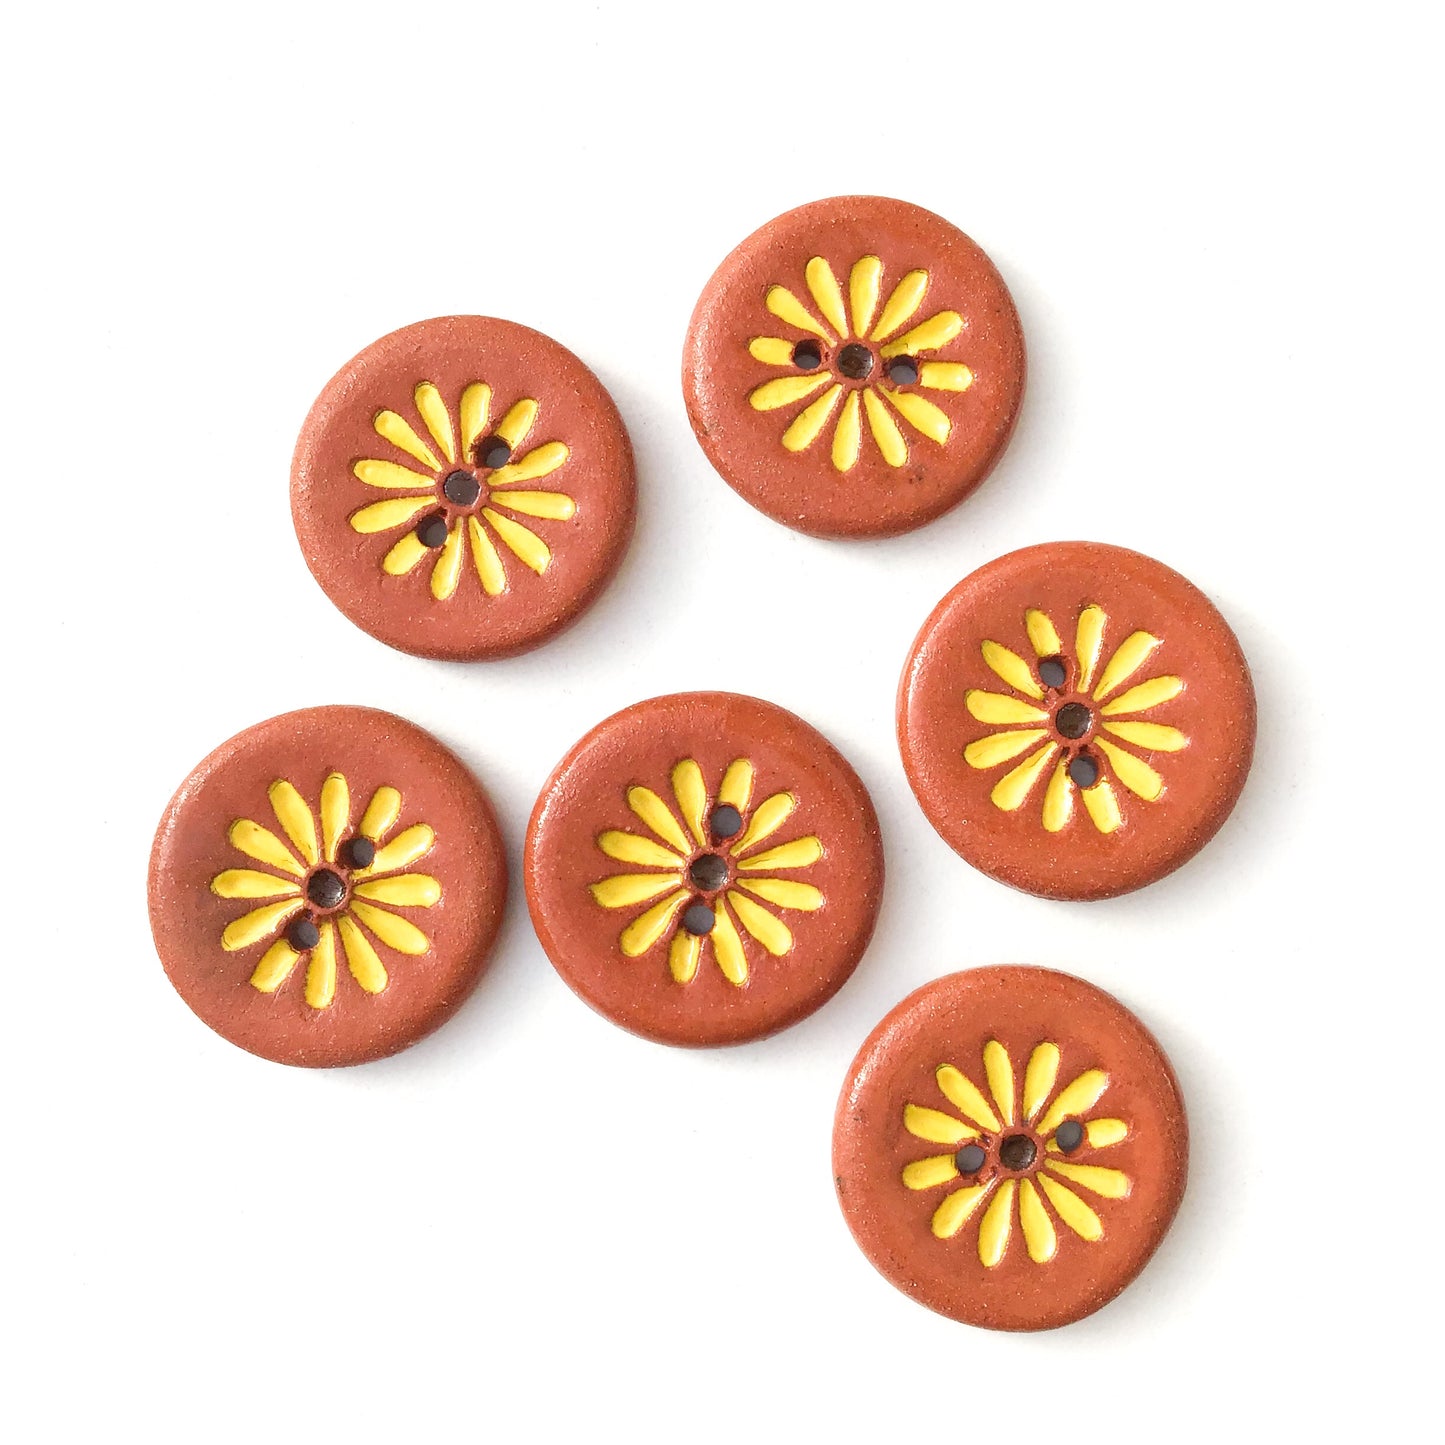 (Wholesale Accounts Only) 3/4" Daisy - round edge - red clay (ws-283)